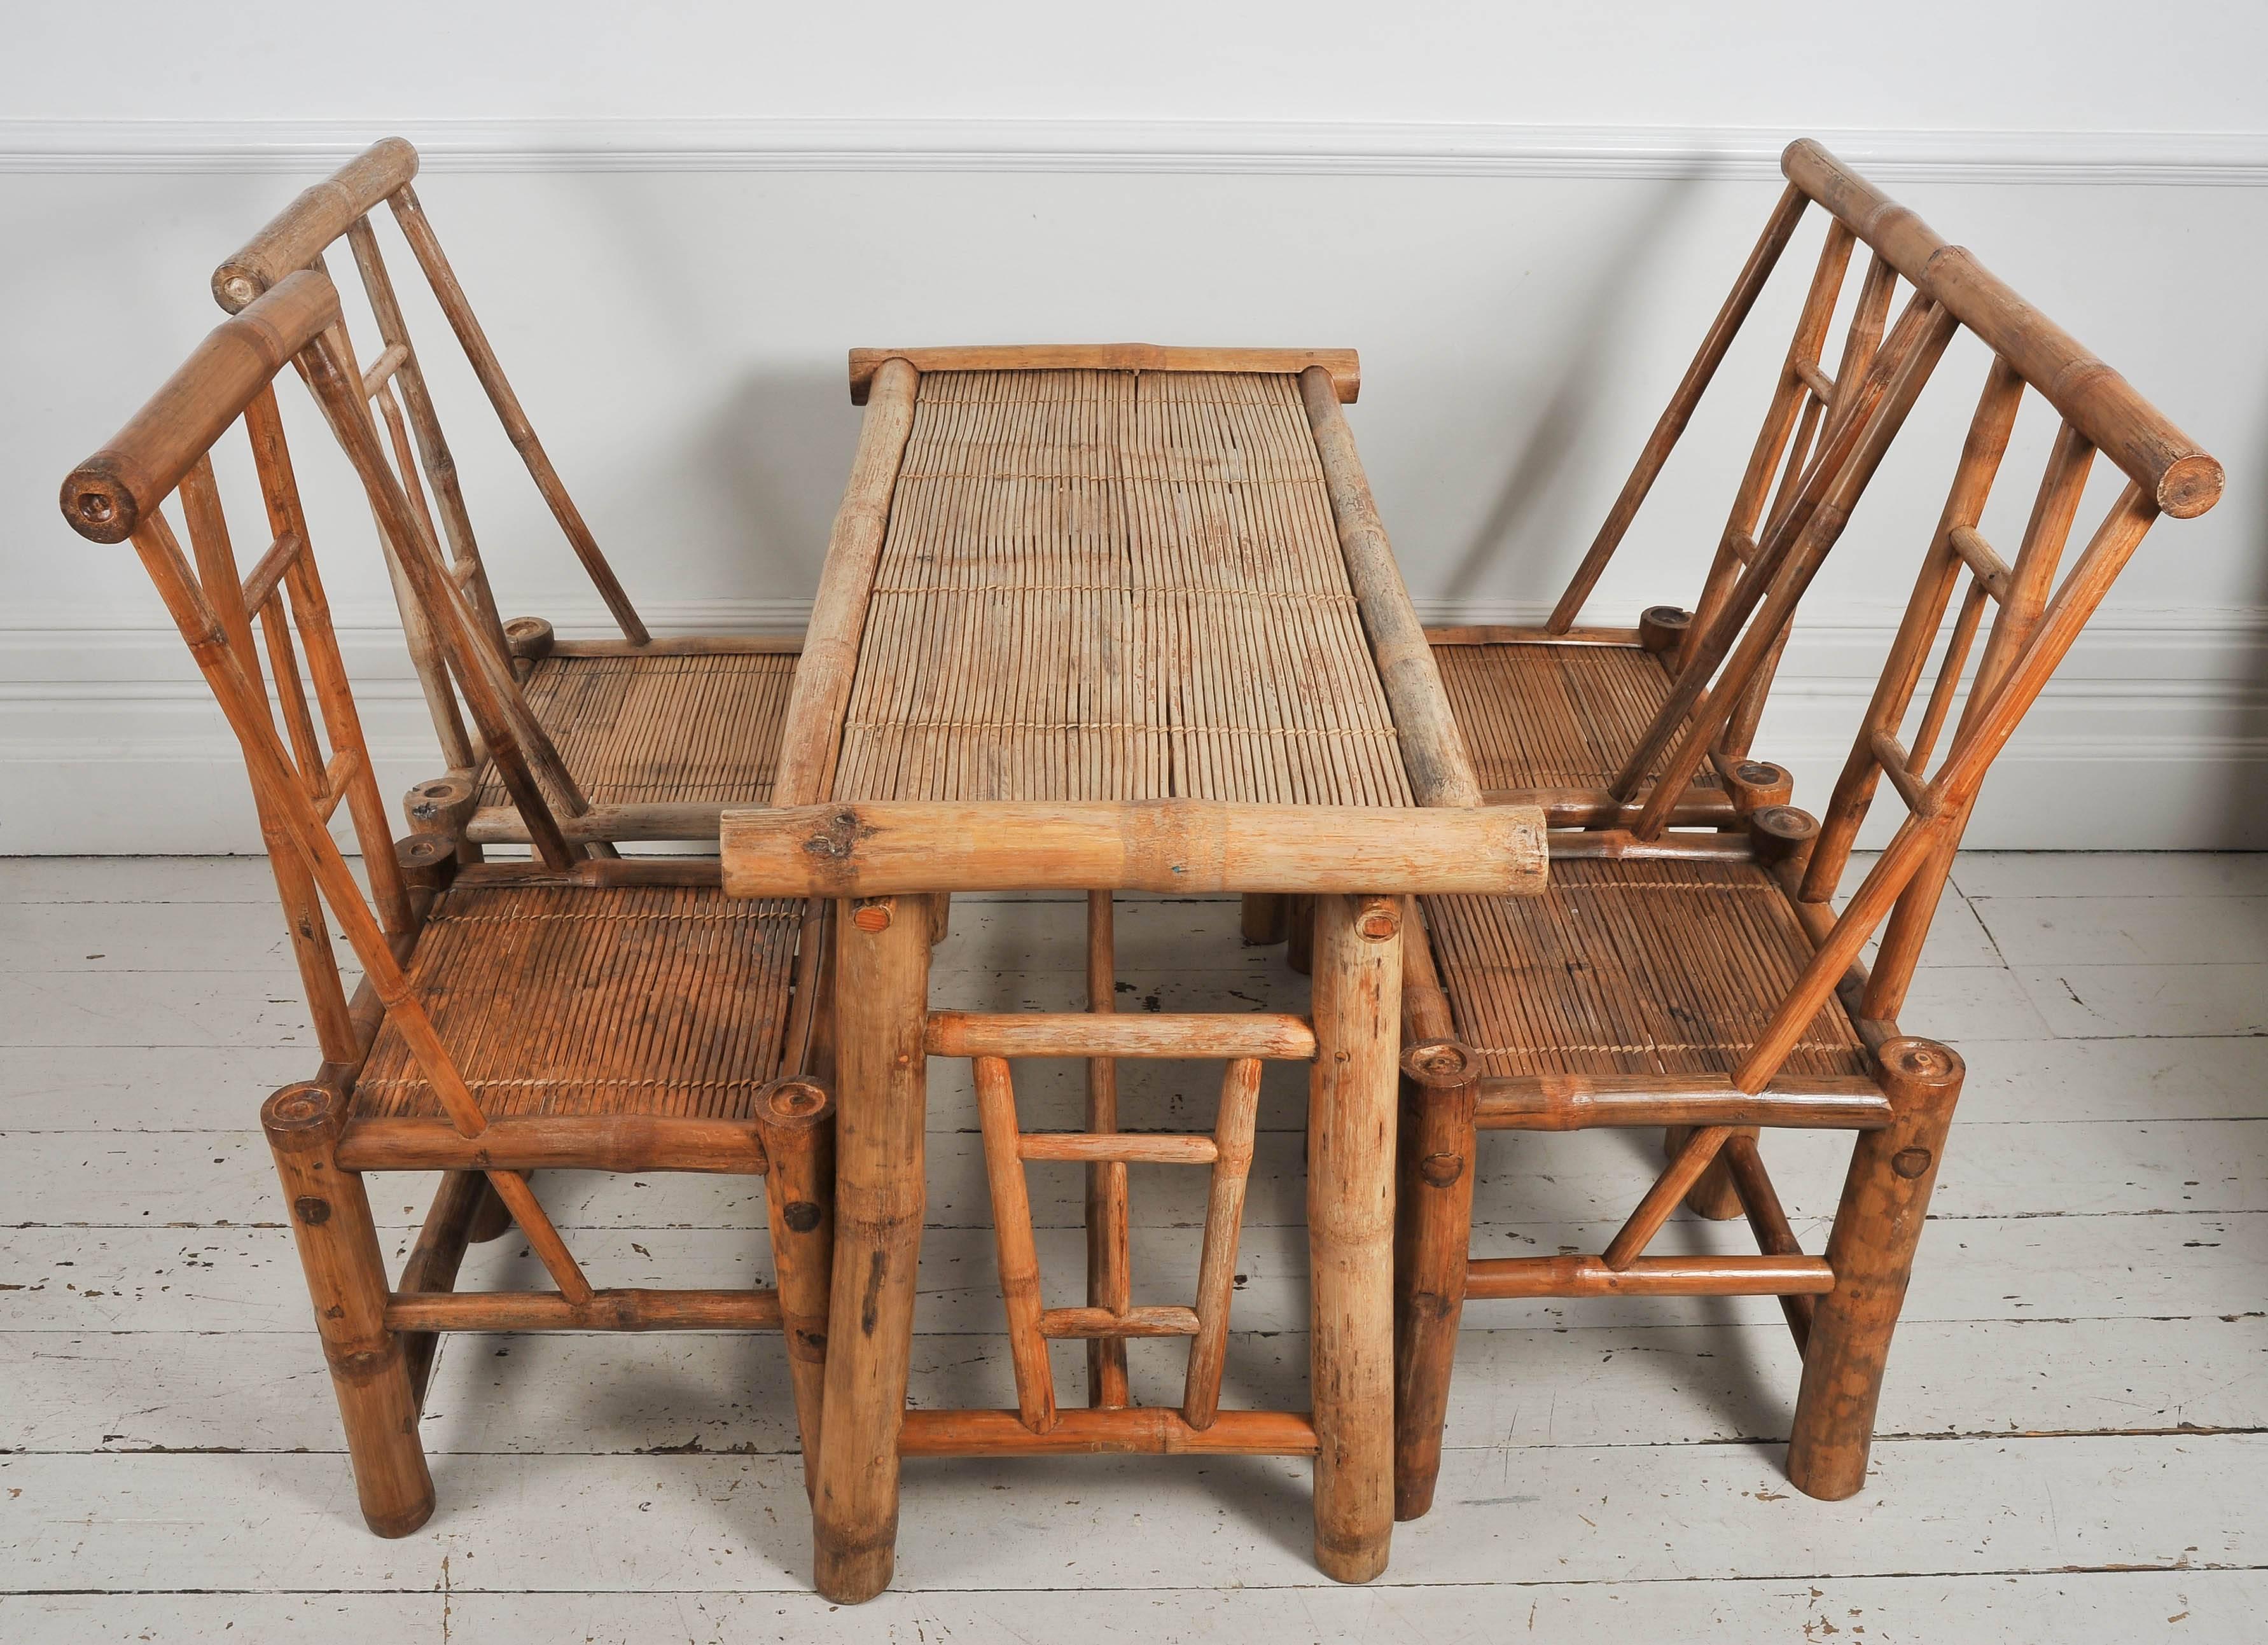 We knew we had to buy this wonderful table and chairs the moment we saw them! The typical 1950s lines work especially well together here. The bamboo is nicely faded and the chairs super comfortable. We think these are very cool indeed,

circa: